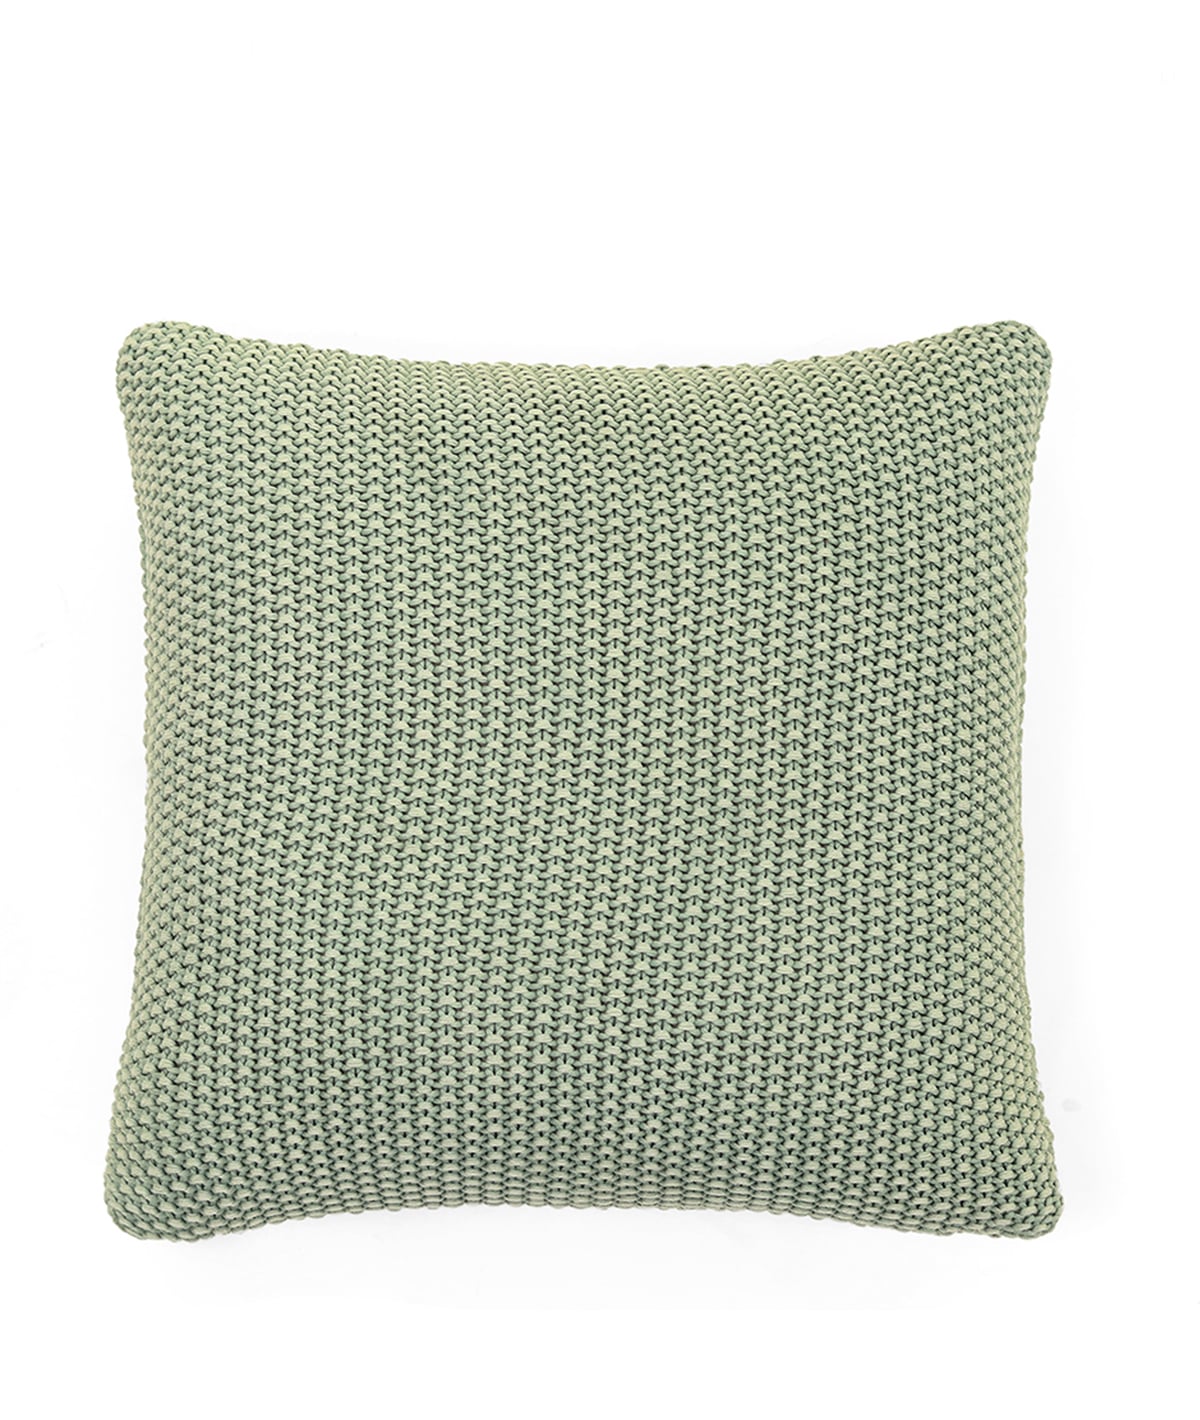 Knitted Purl Ryegrass Cotton Knitted Decorative 16 X 16 Inches Cushion Cover